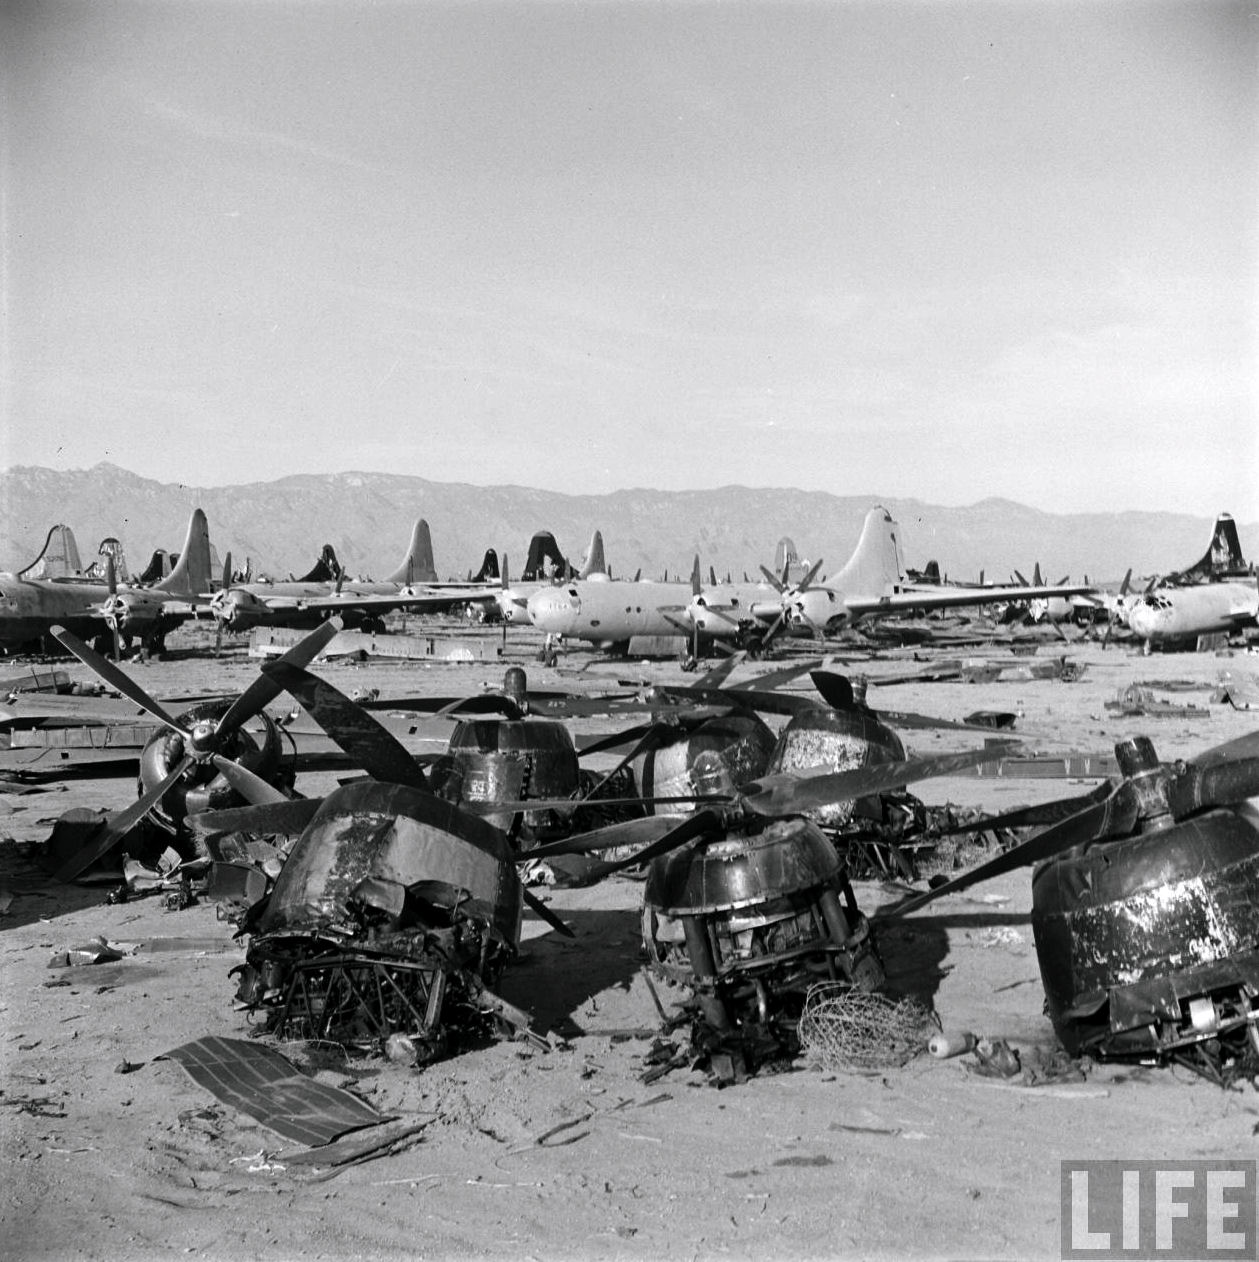 B-29 Superfortresses in storage at Davis-Monthan Air Force Base. (LIFE Magazine)